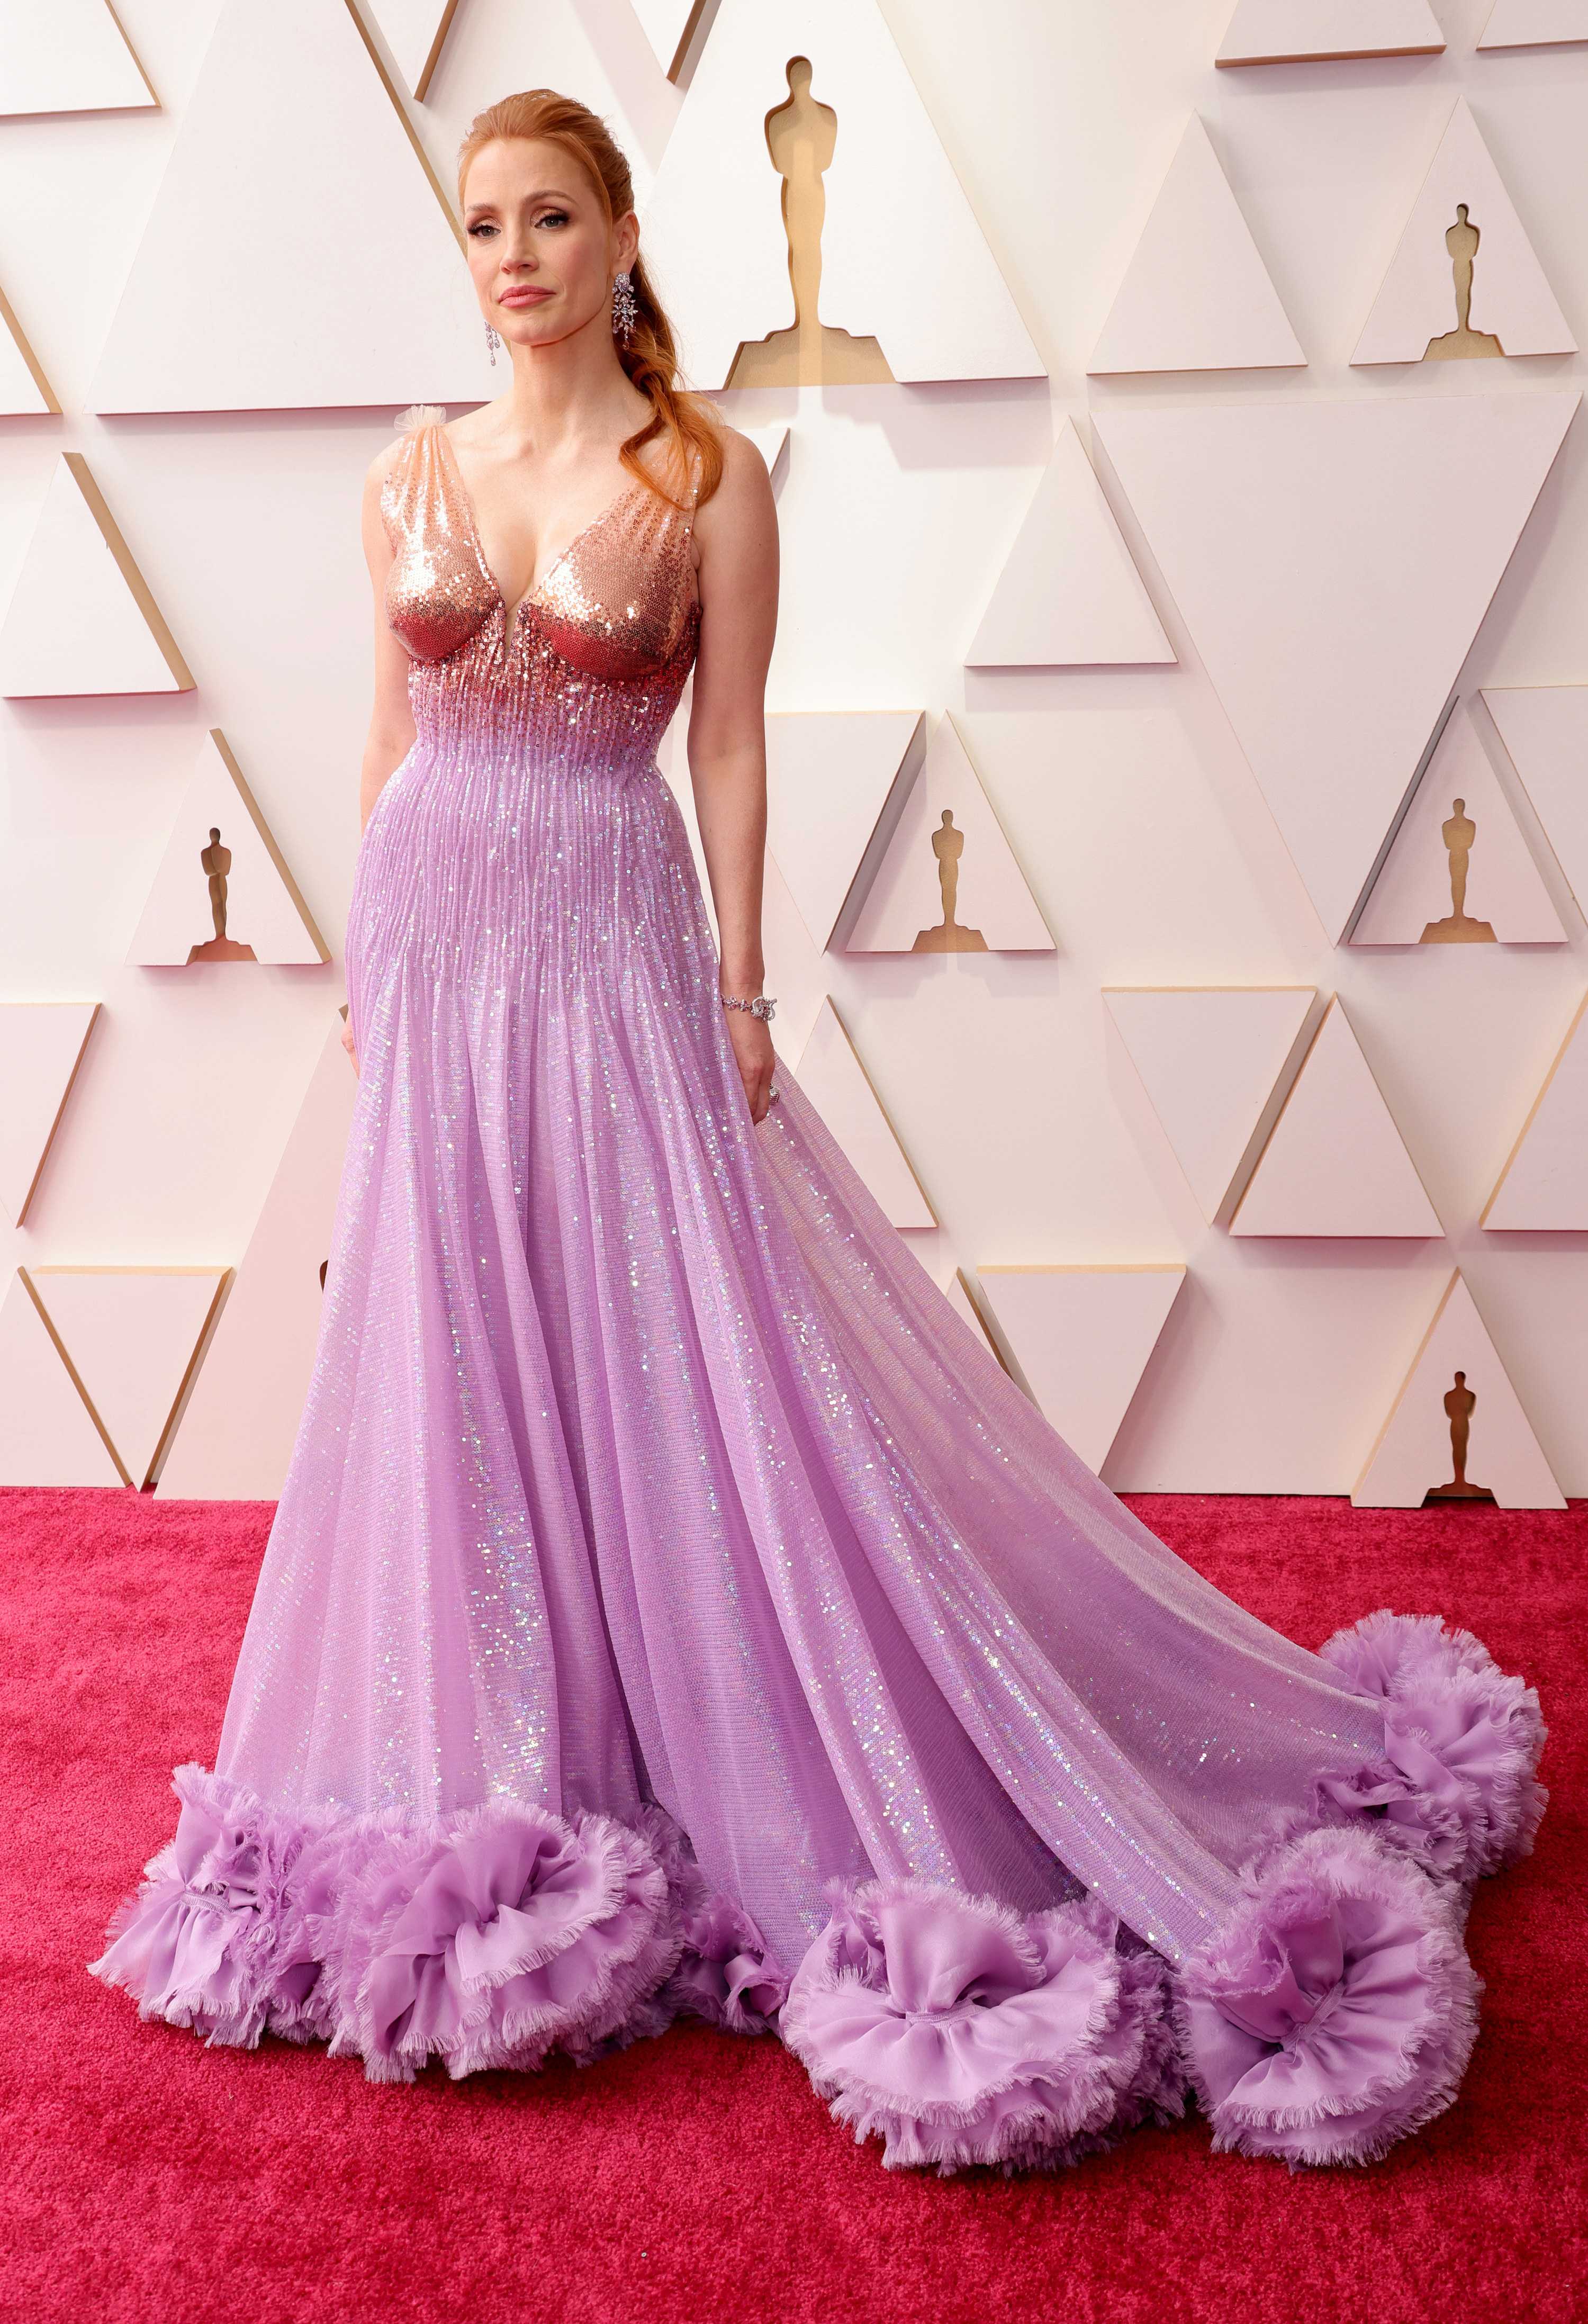 Jessica wearing a purple and gold sparkling gown